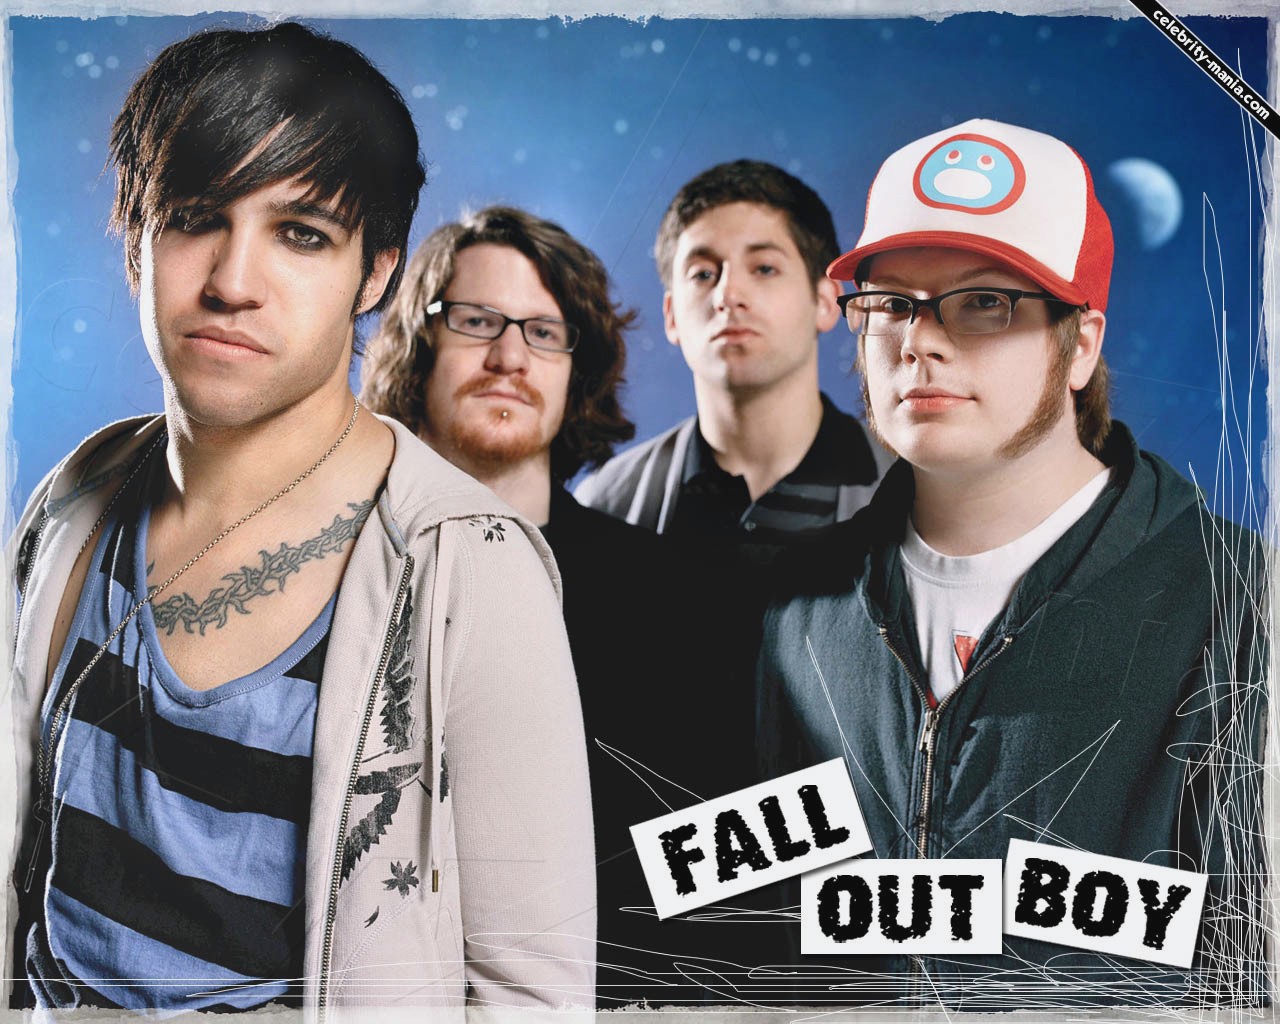 fall out boy wallpaper,poster,album cover,movie,photography,pop music